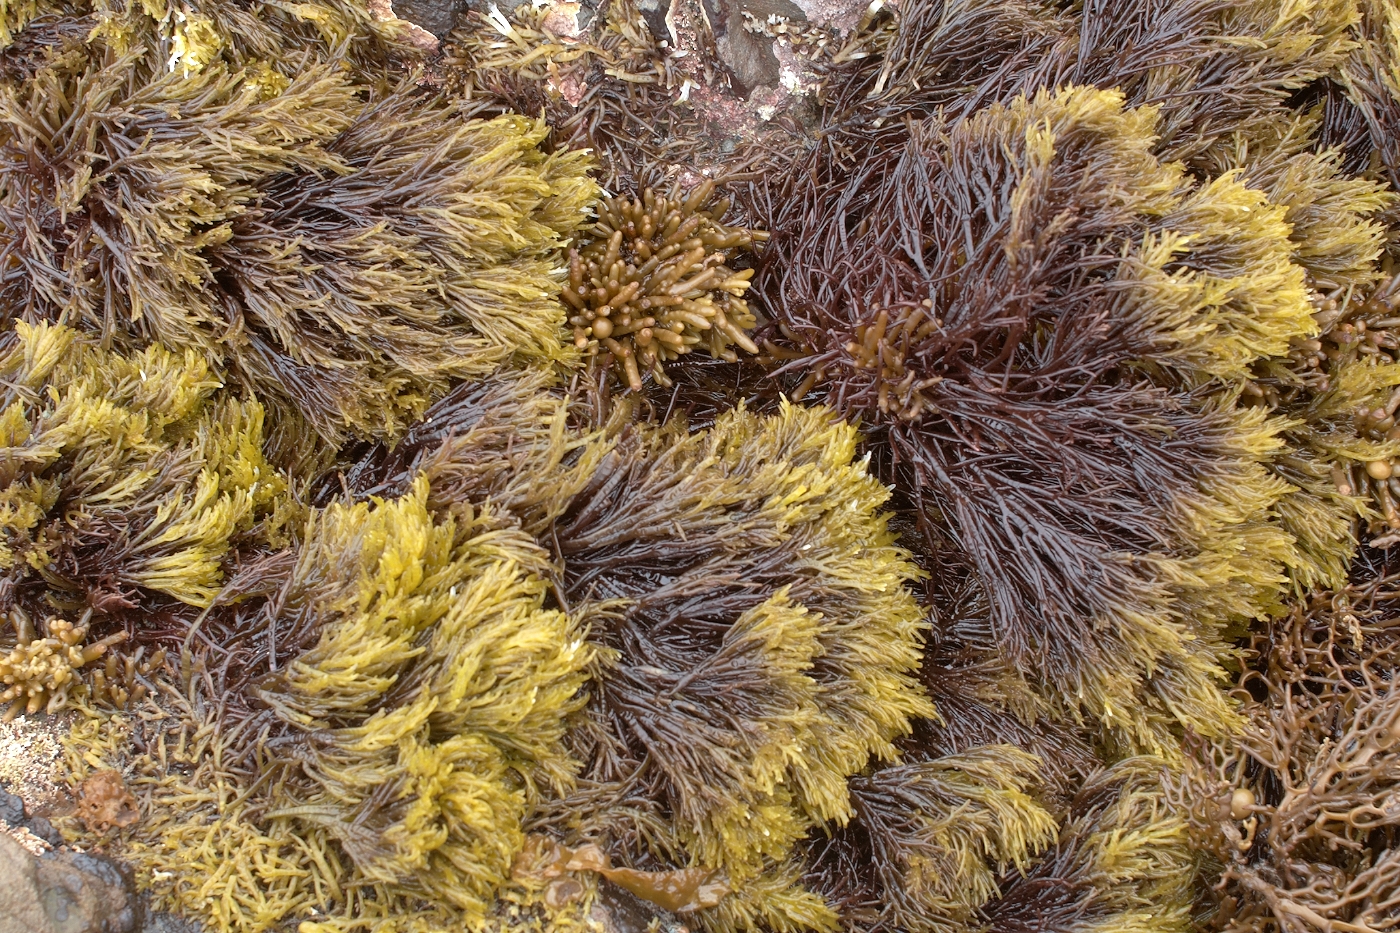 Moa Point seaweed, photographed by Jean-Claude